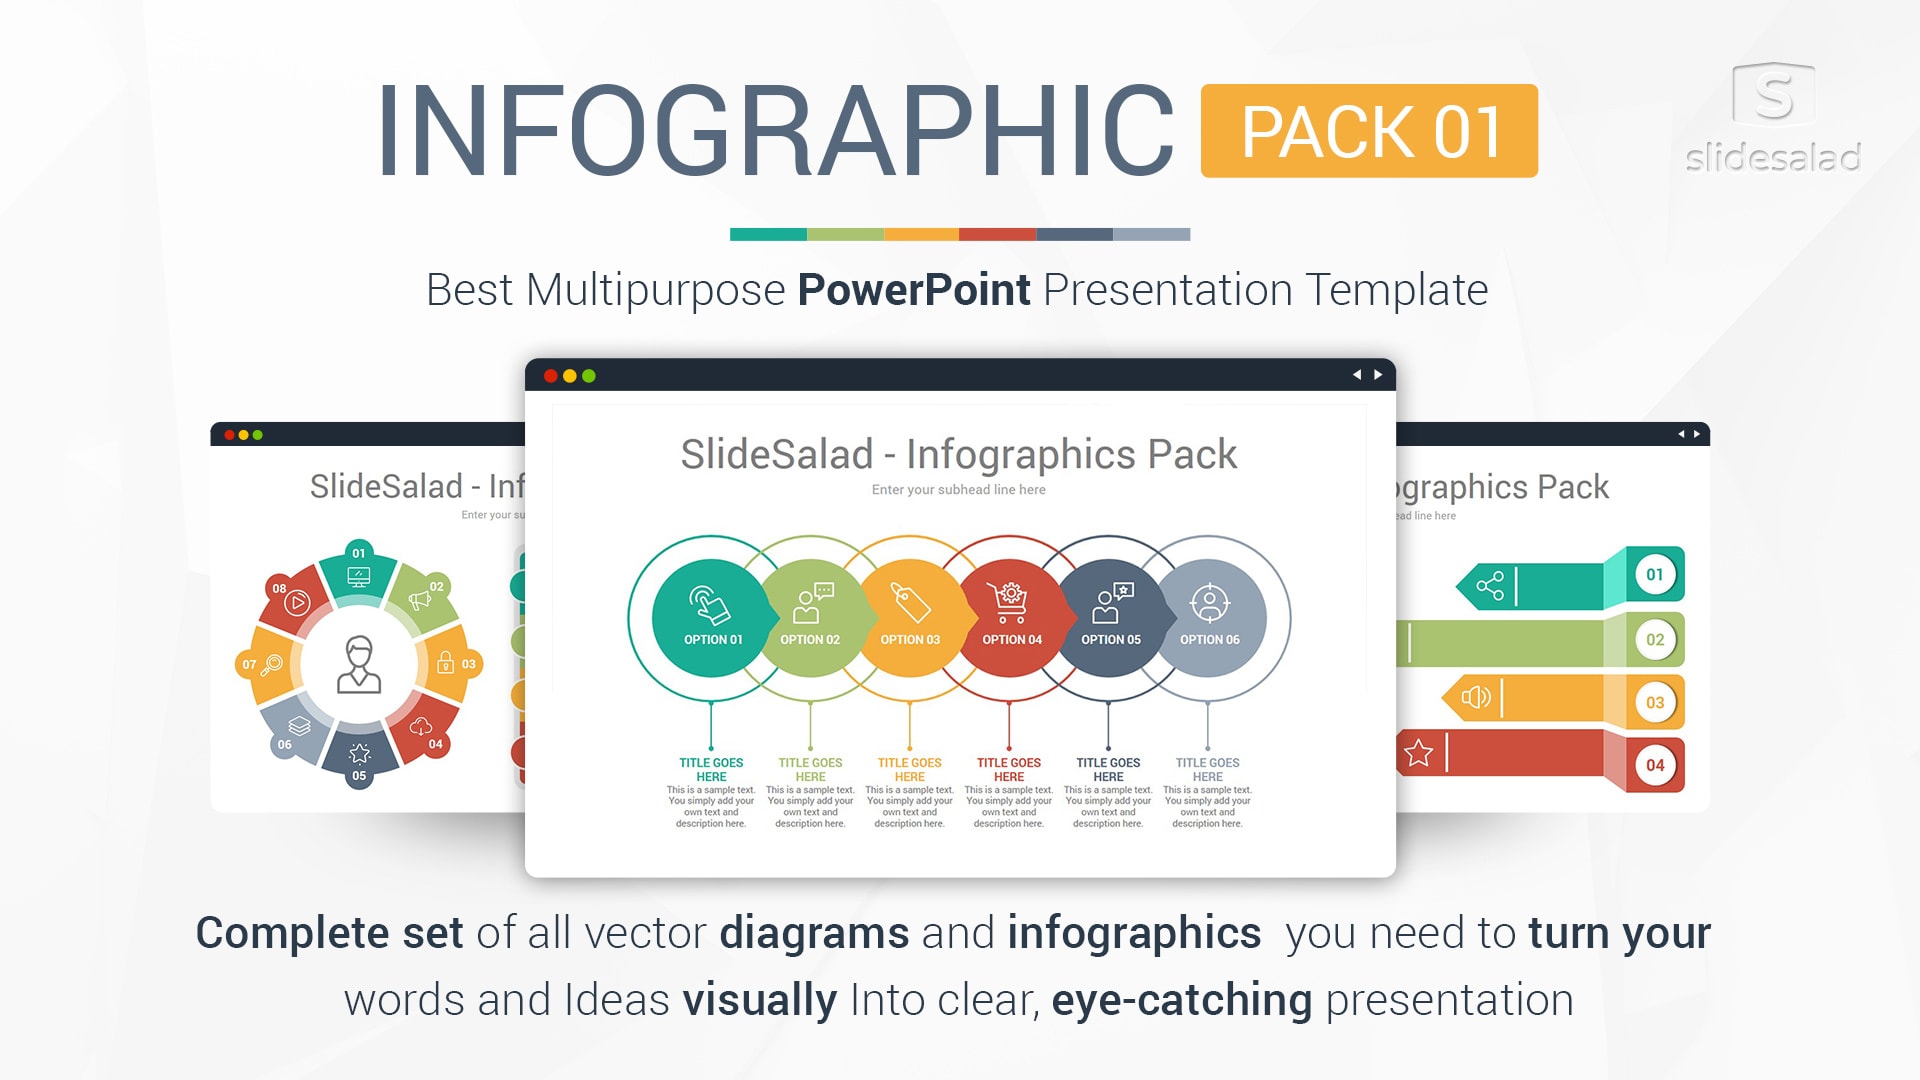 Infographic Designs Pack 01 – Top PowerPoint Template for Business Needs